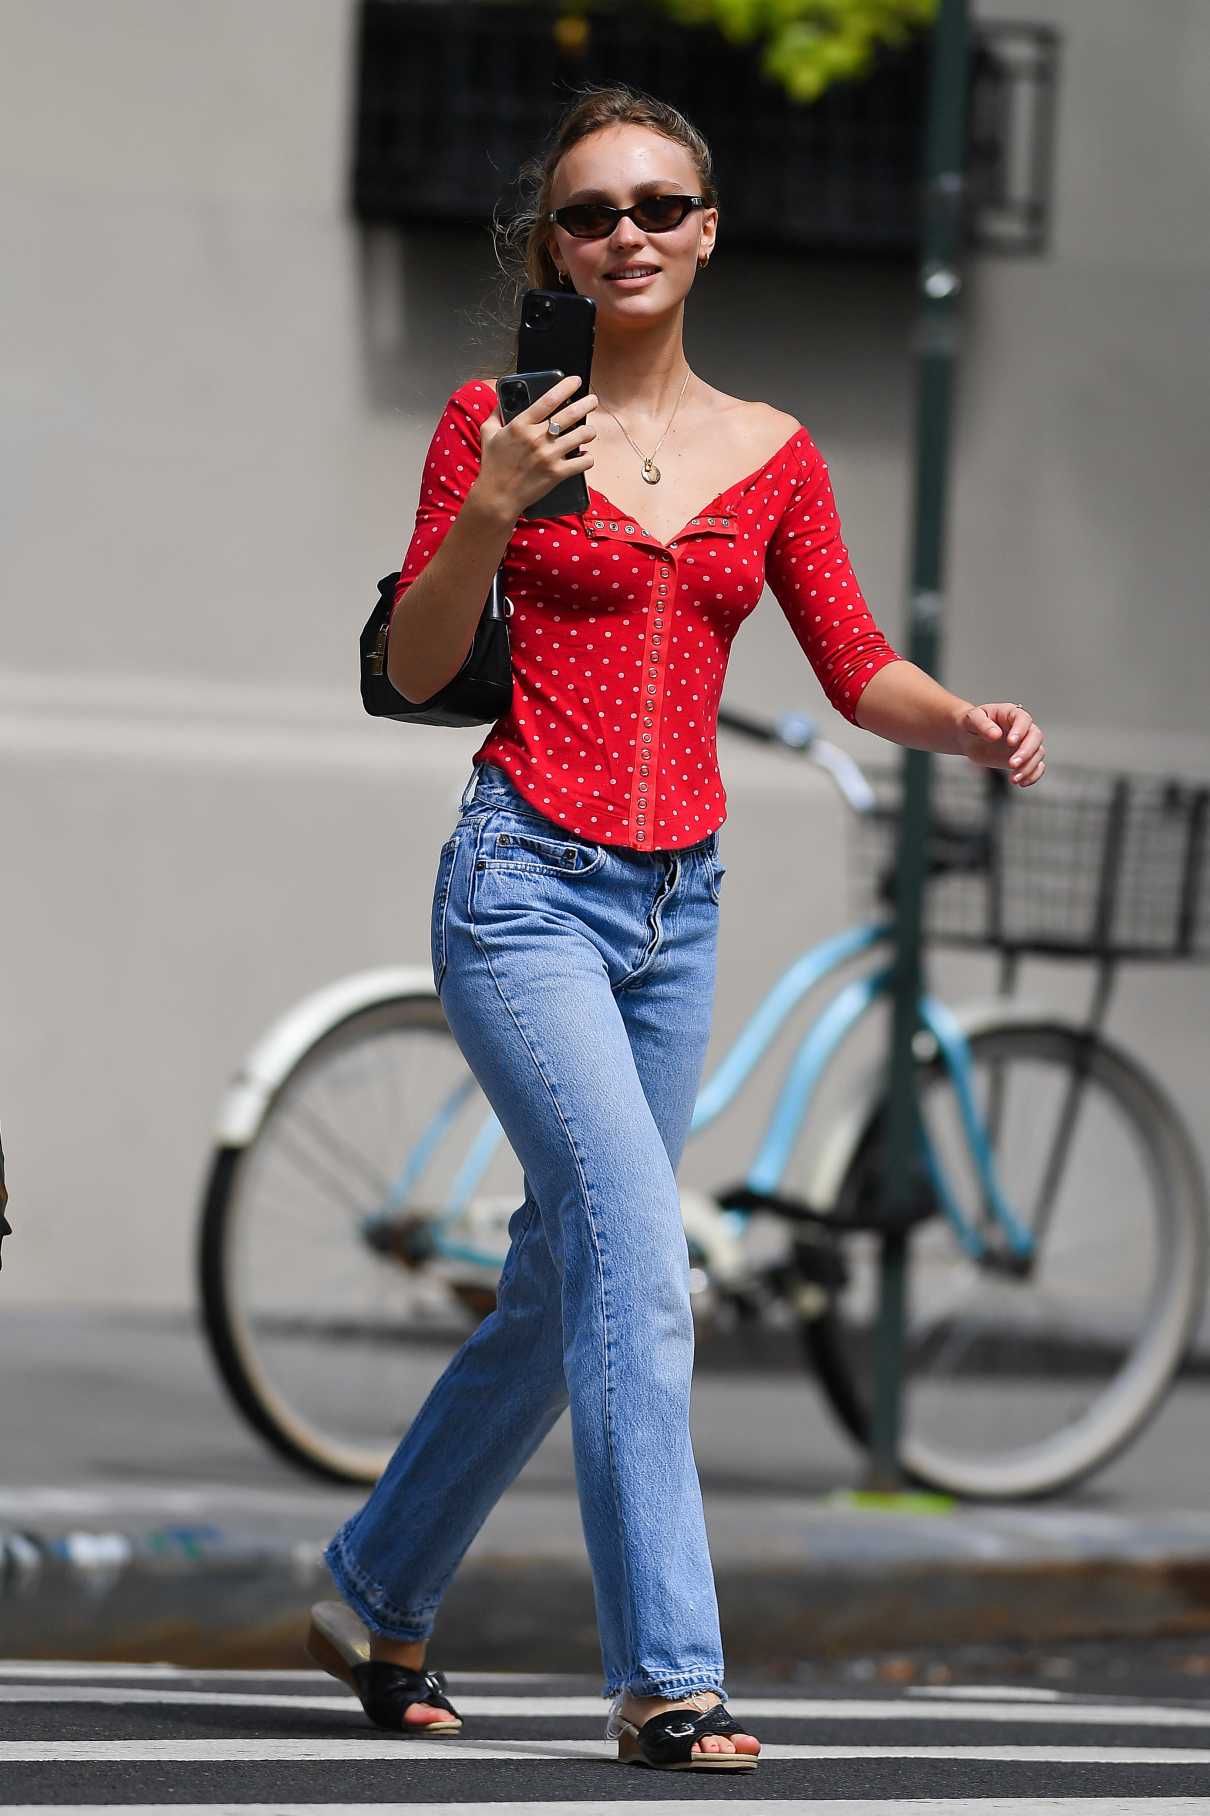 Lily-Rose Depp in a Red Polka Dot Blouse